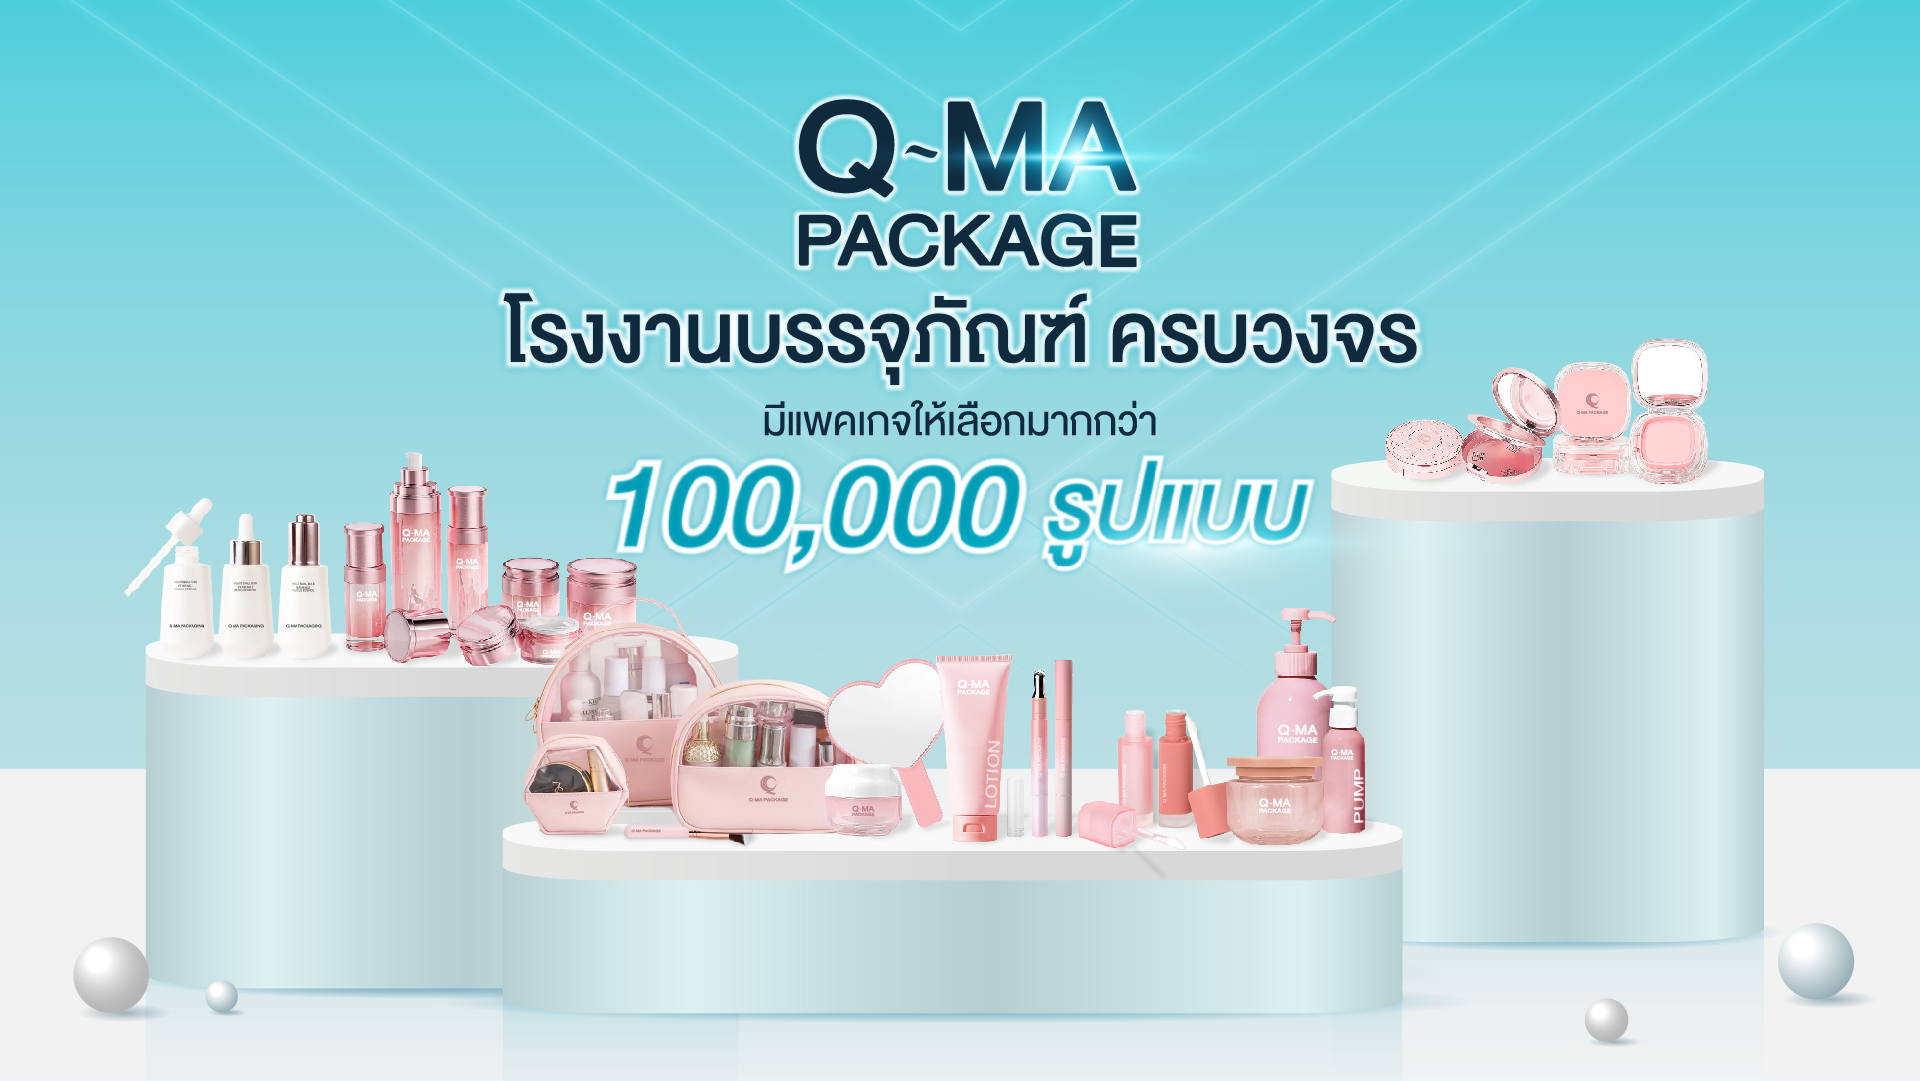 Cover WEB Q MA package 02